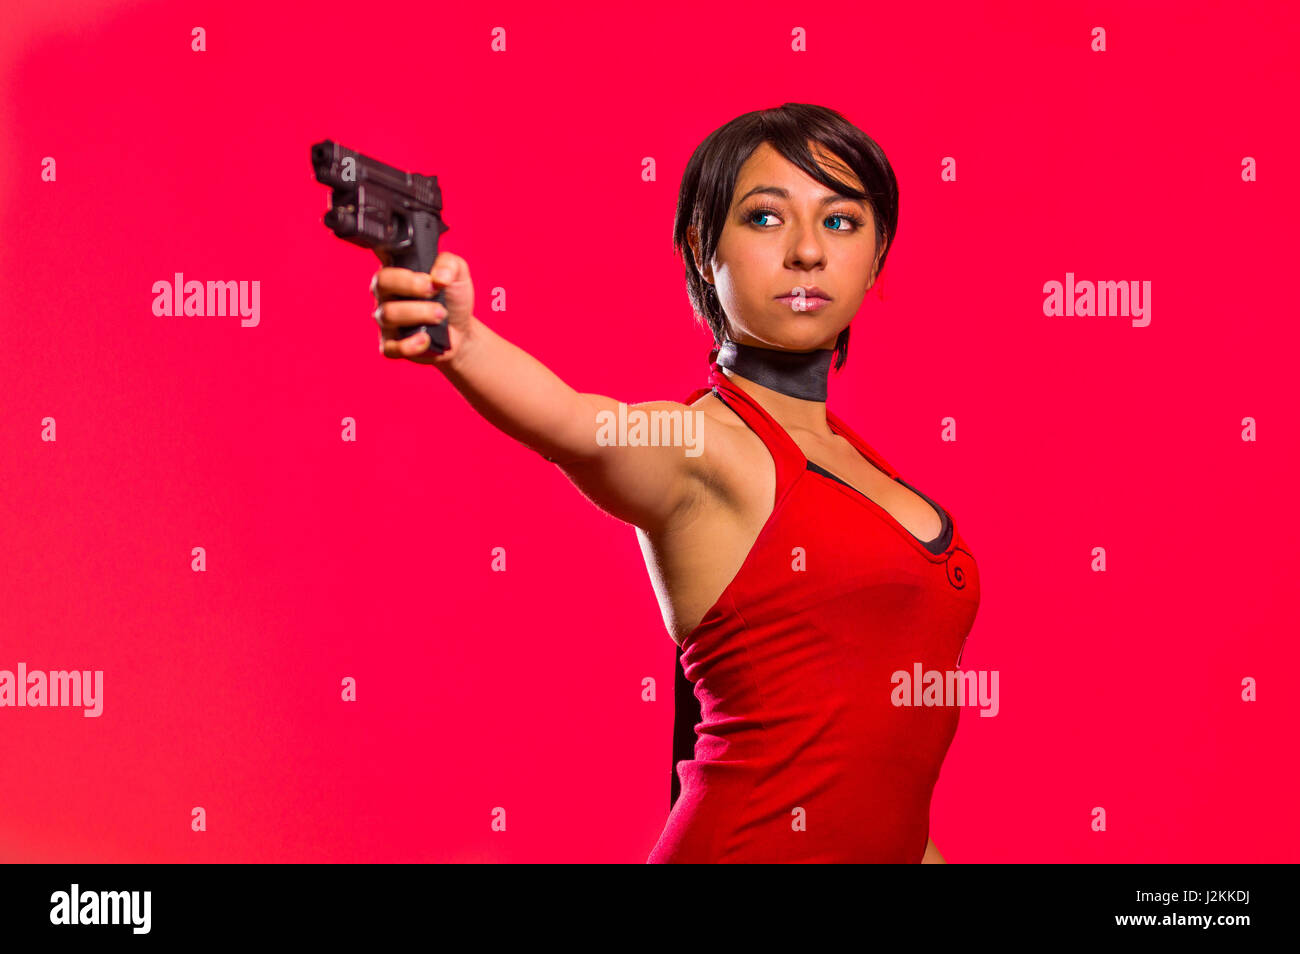 Powerful Woman Holding a gun, resident evil cosplay costume Stock Photo